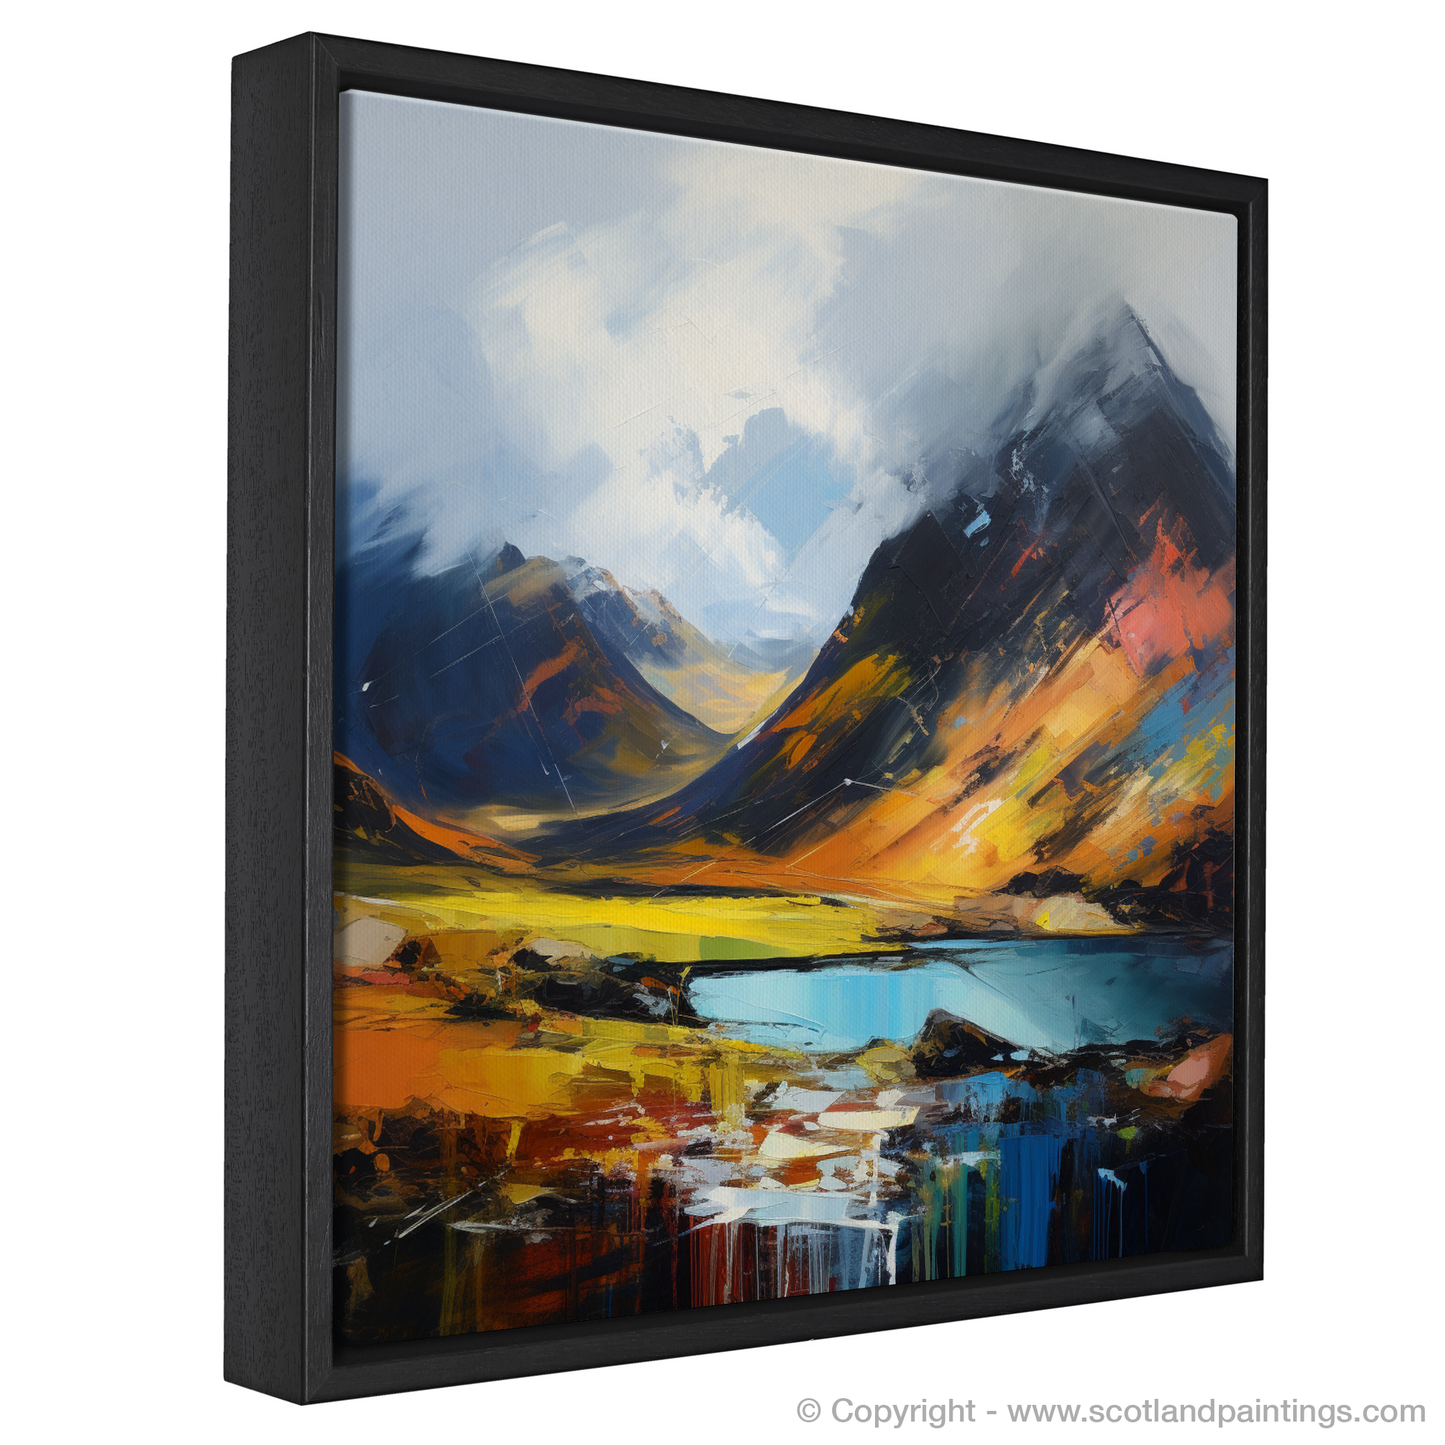 Painting and Art Print of Beinn Narnain entitled "Beinn Narnain Unleashed: An Expressionist Homage to the Scottish Highlands".